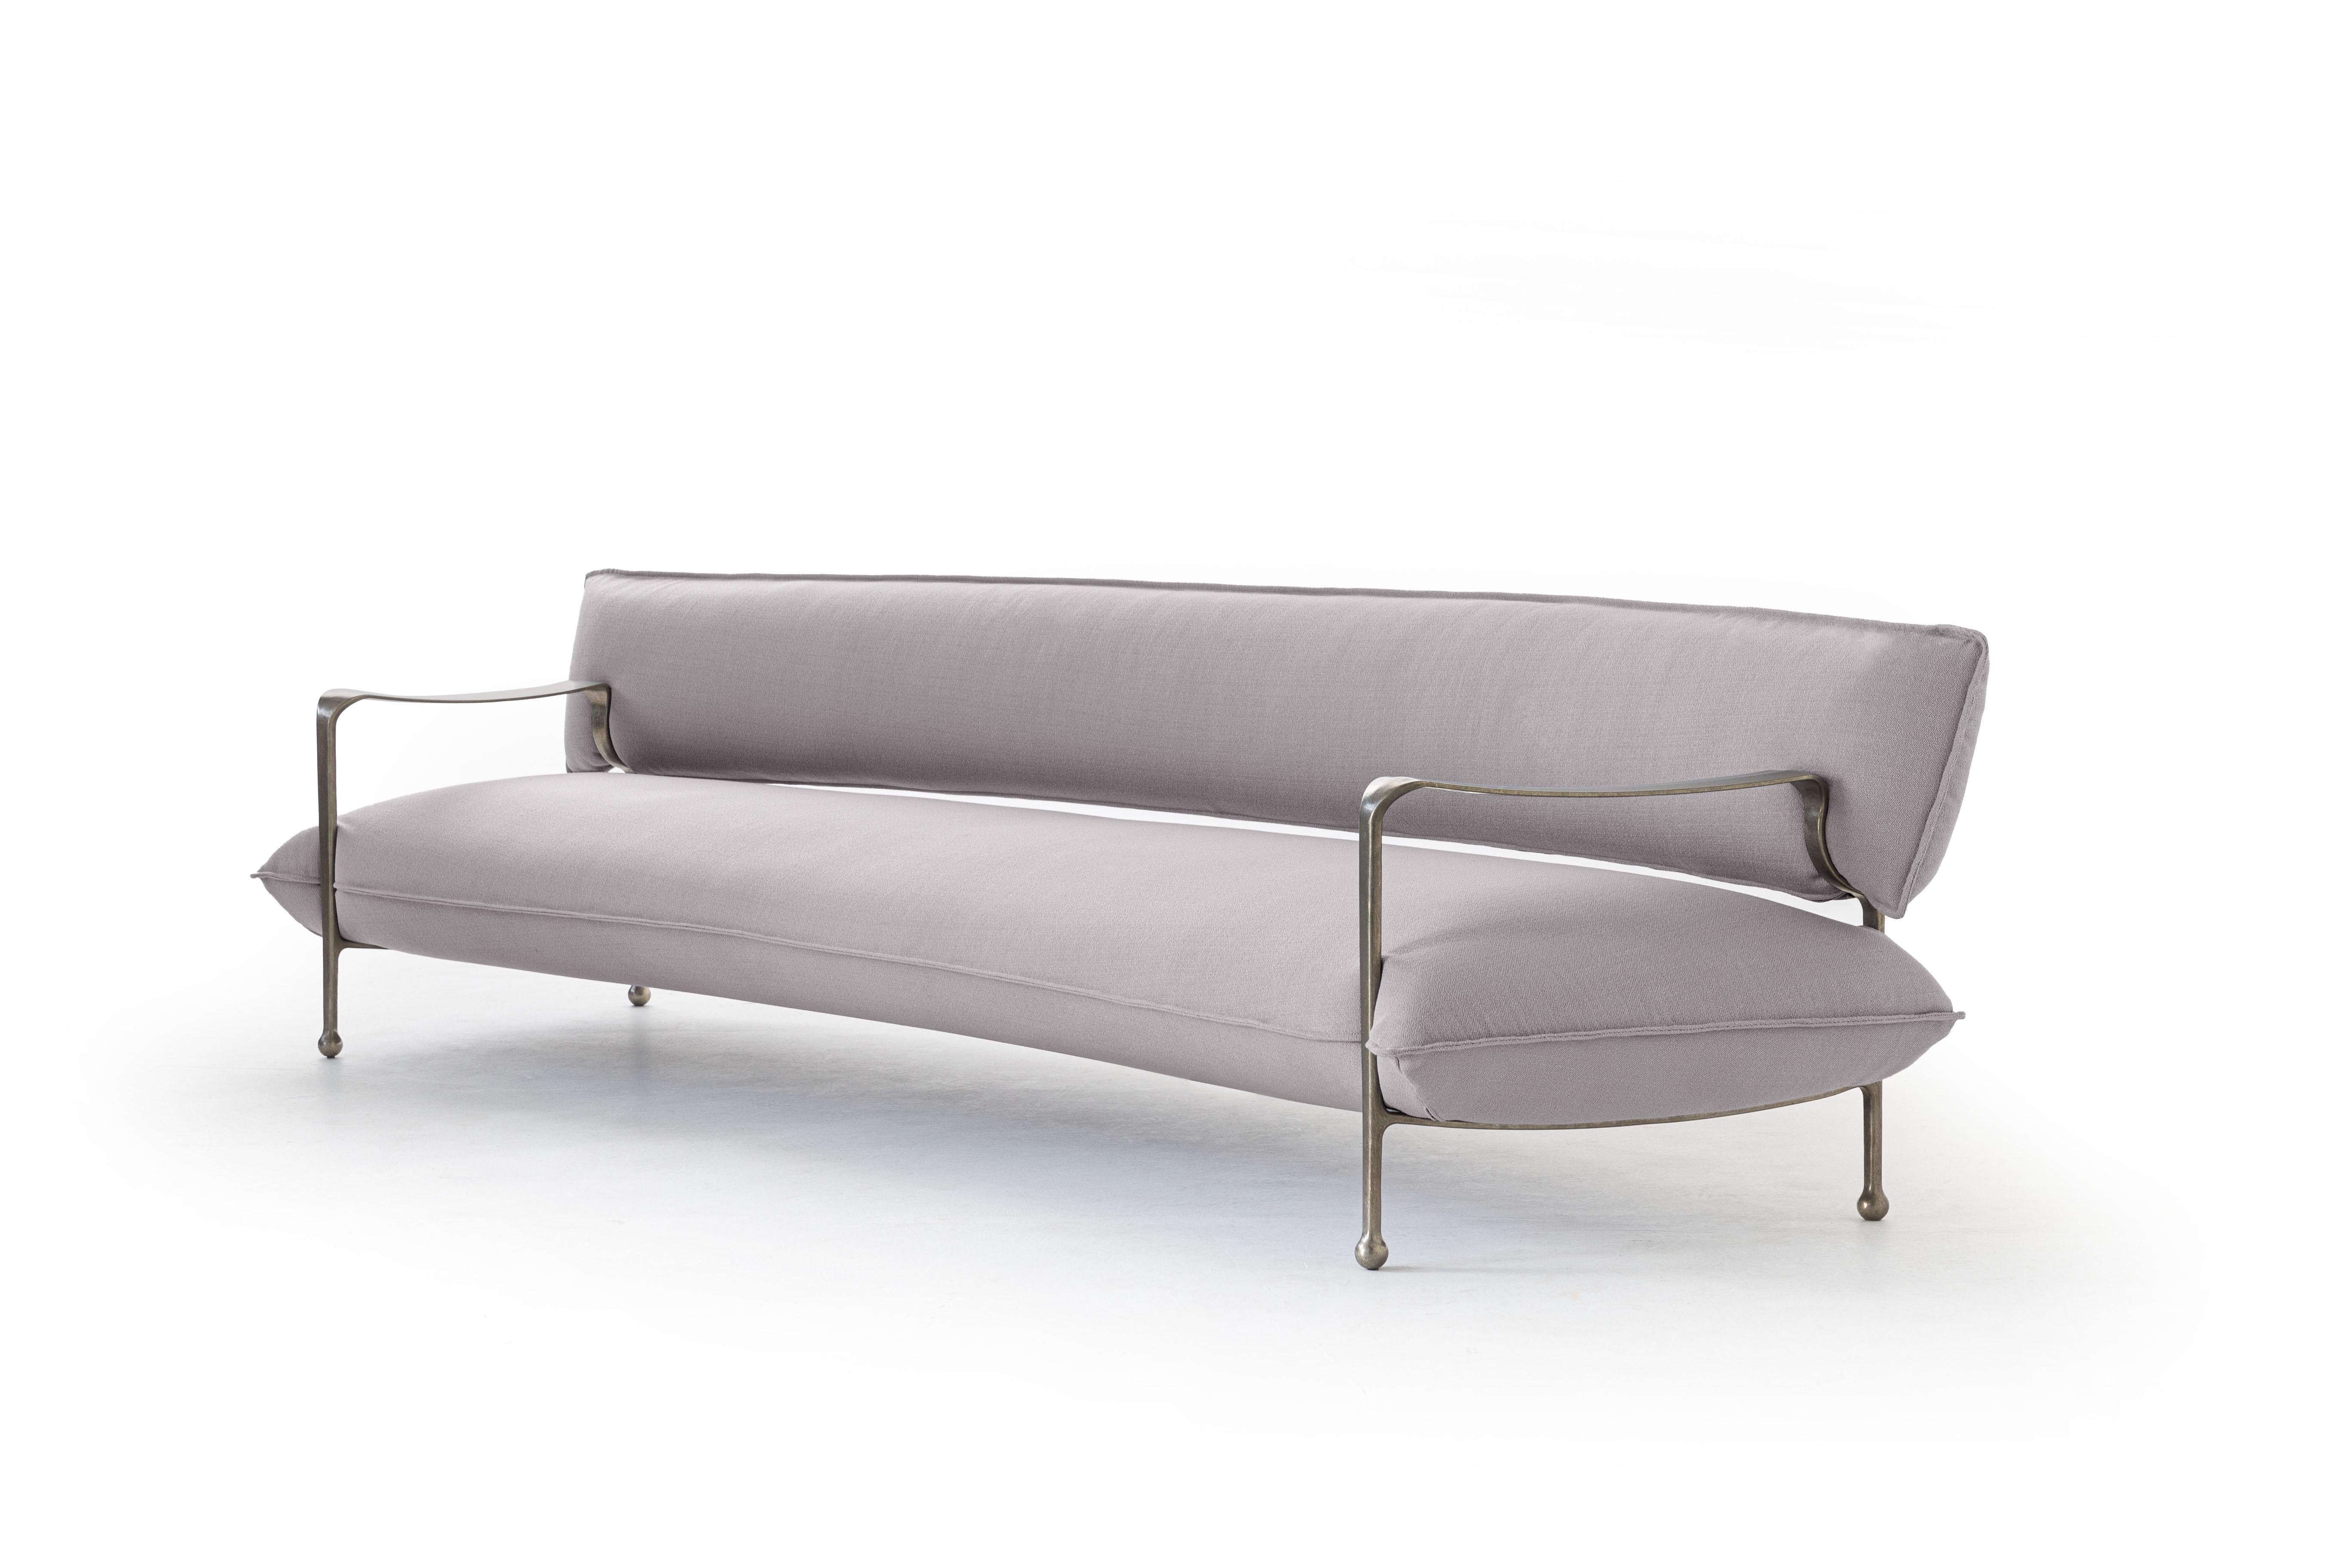 Riace 4 Seater Sofa by Ronan & Erwan Boroullec for MAGIS For Sale 2